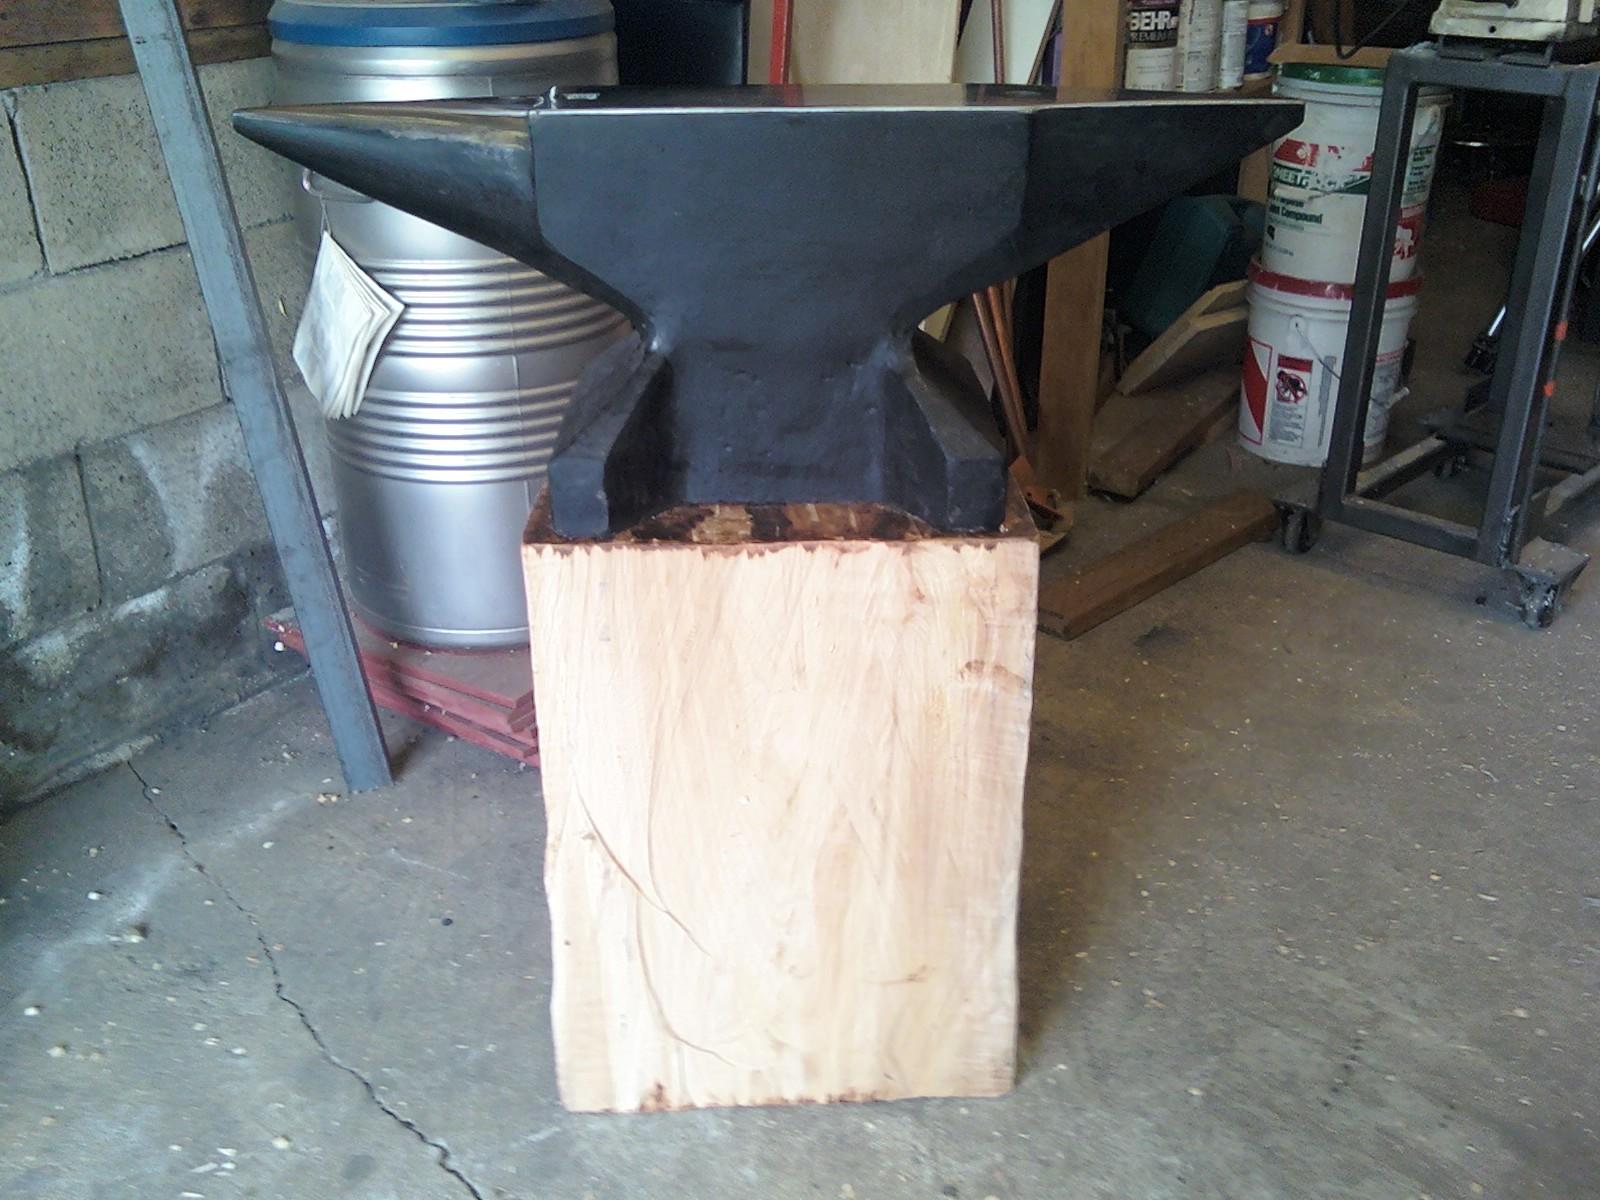 New home for my anvil